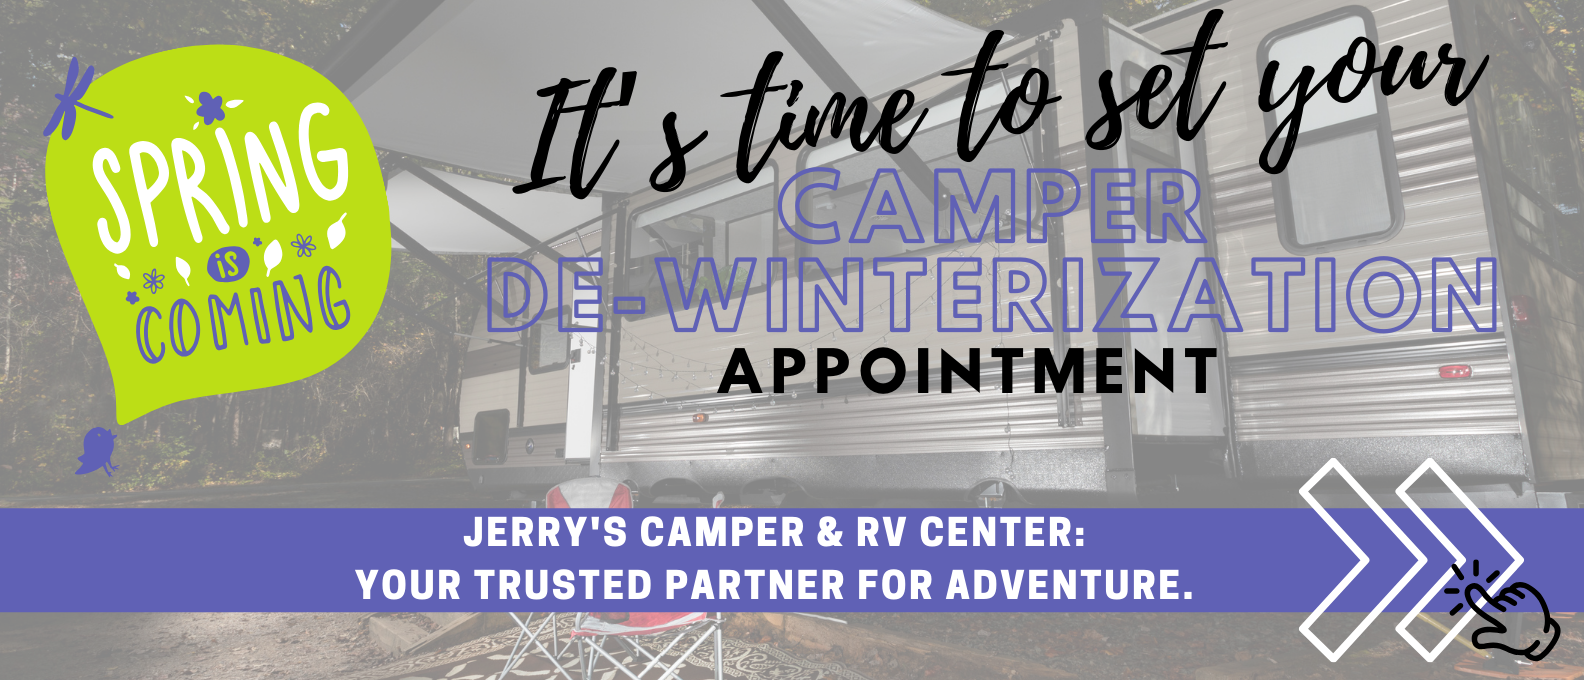 Set your appointment today to De-Winterize your camper at Jerry's Camper & RV Center